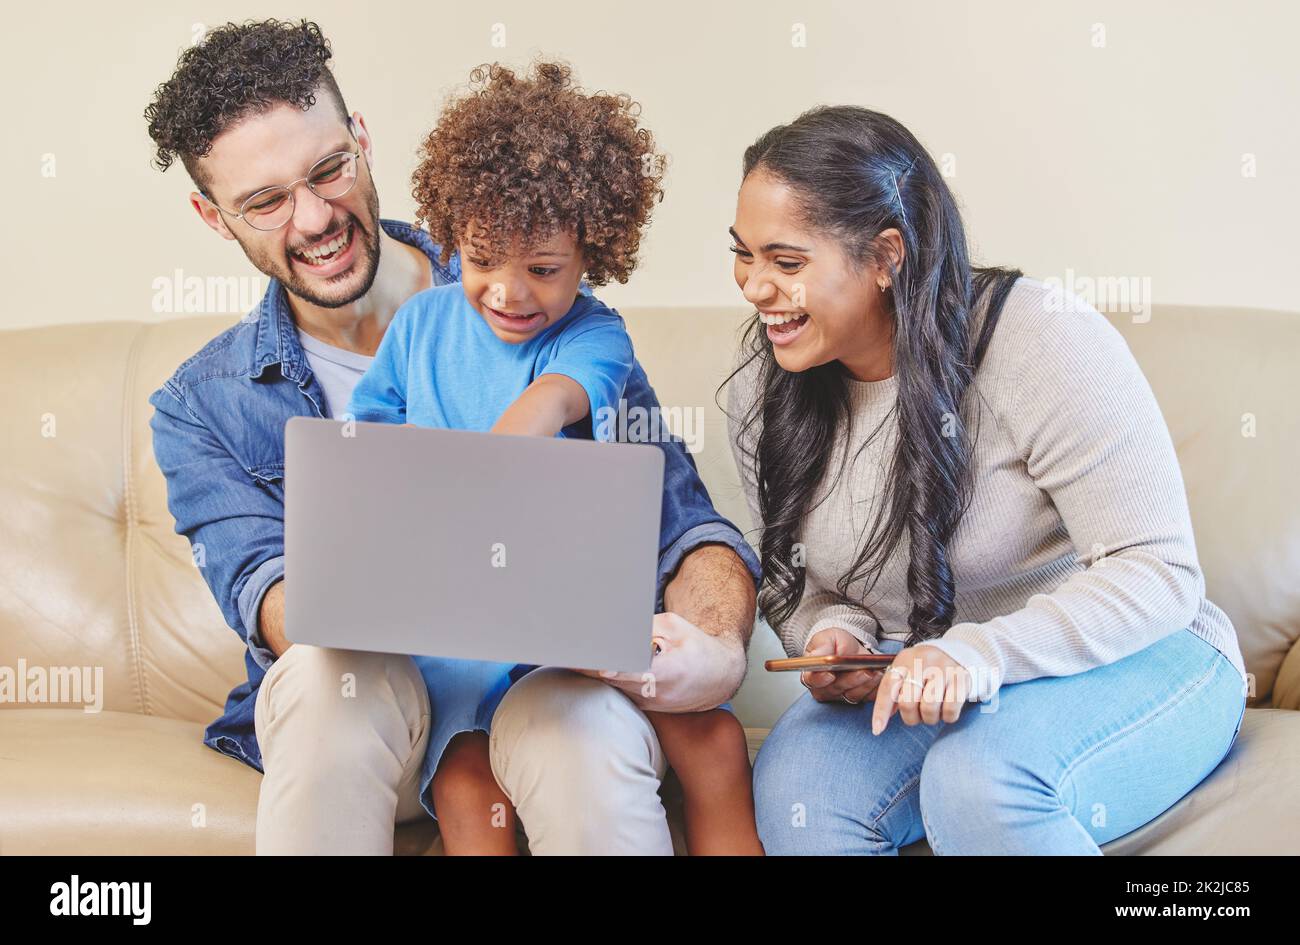 Make education fun again. Shot of a young family using a laptop together. Stock Photo